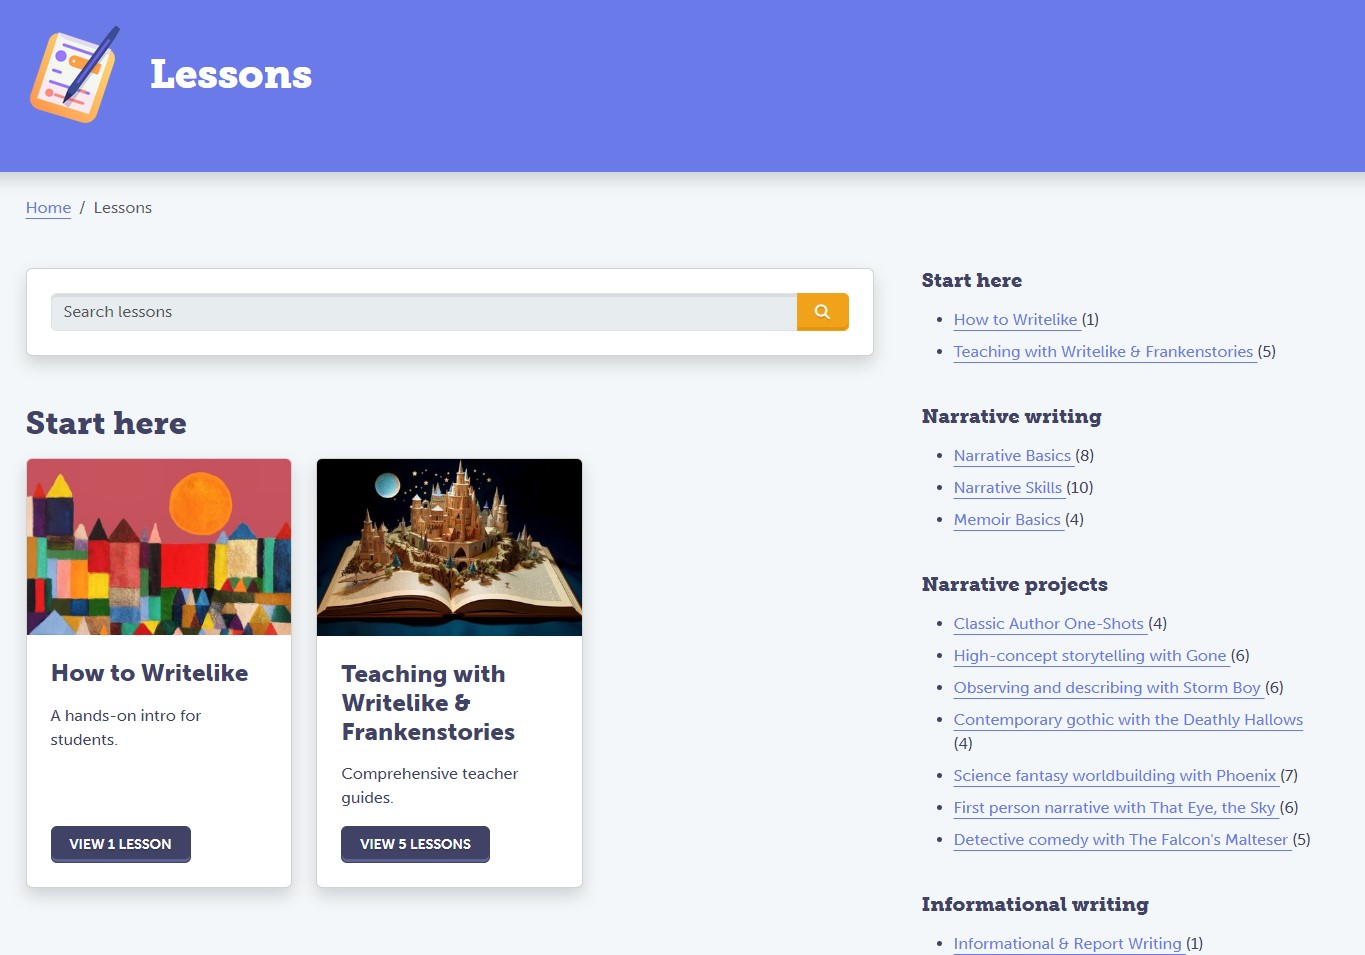 The lesson library lets you browse lessons by topic, or search for specific lessons.